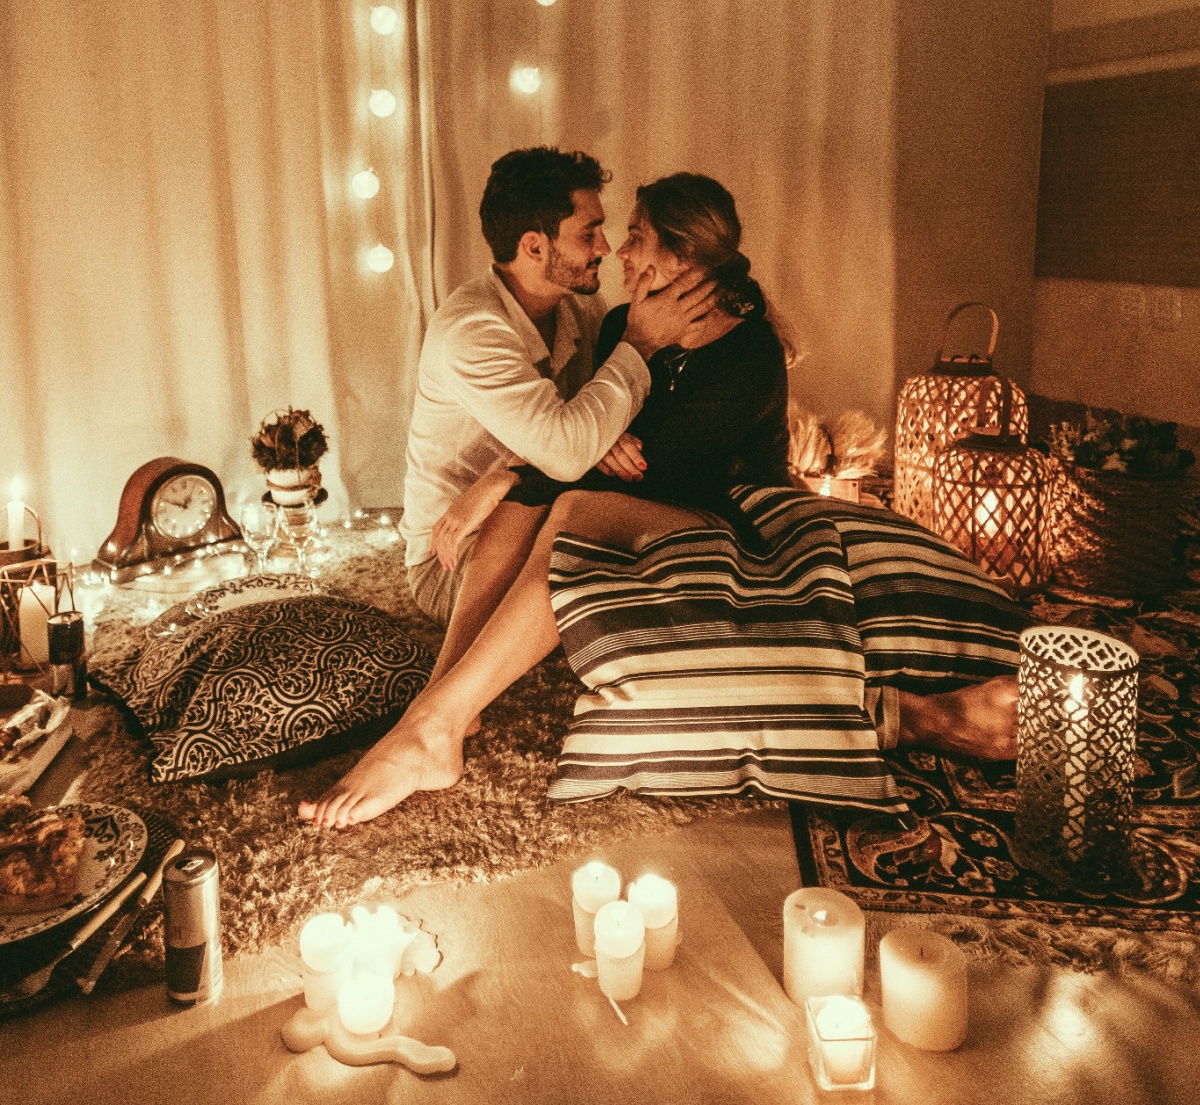 How to plan a date night at home